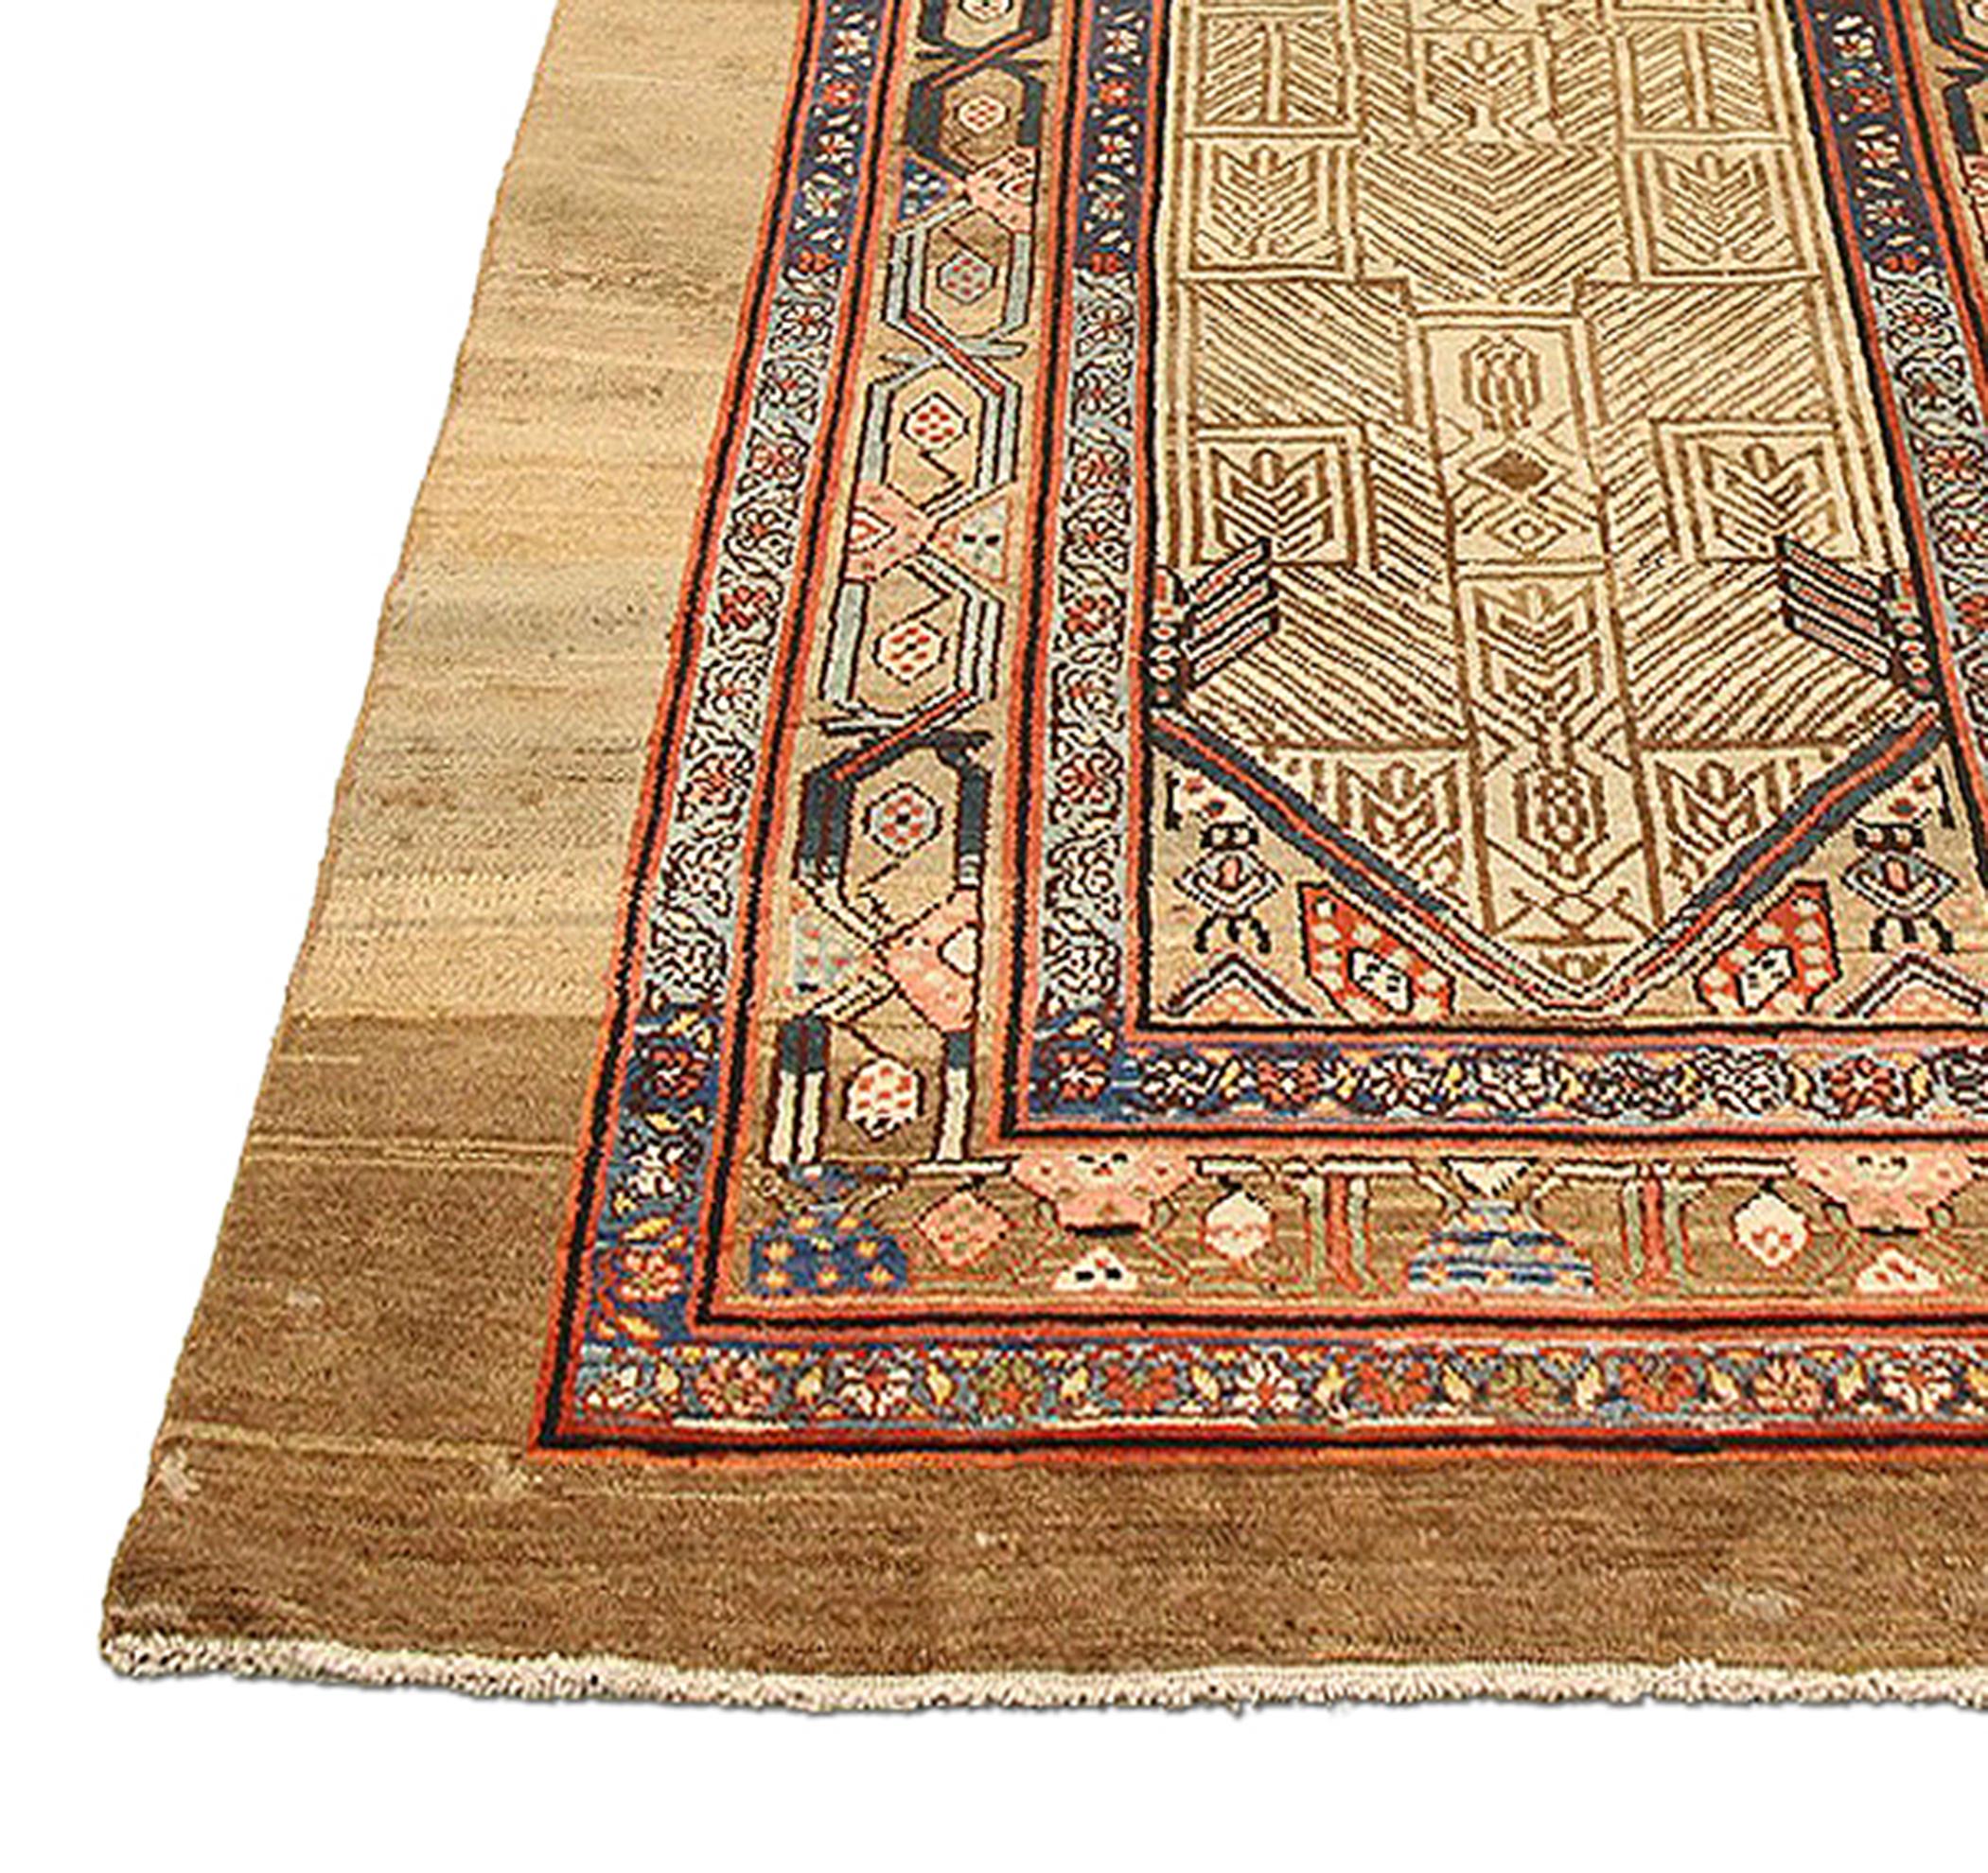 Hand-Woven Antique Persian Sarab Runner Rug with Brown & Beige Geometric Details For Sale